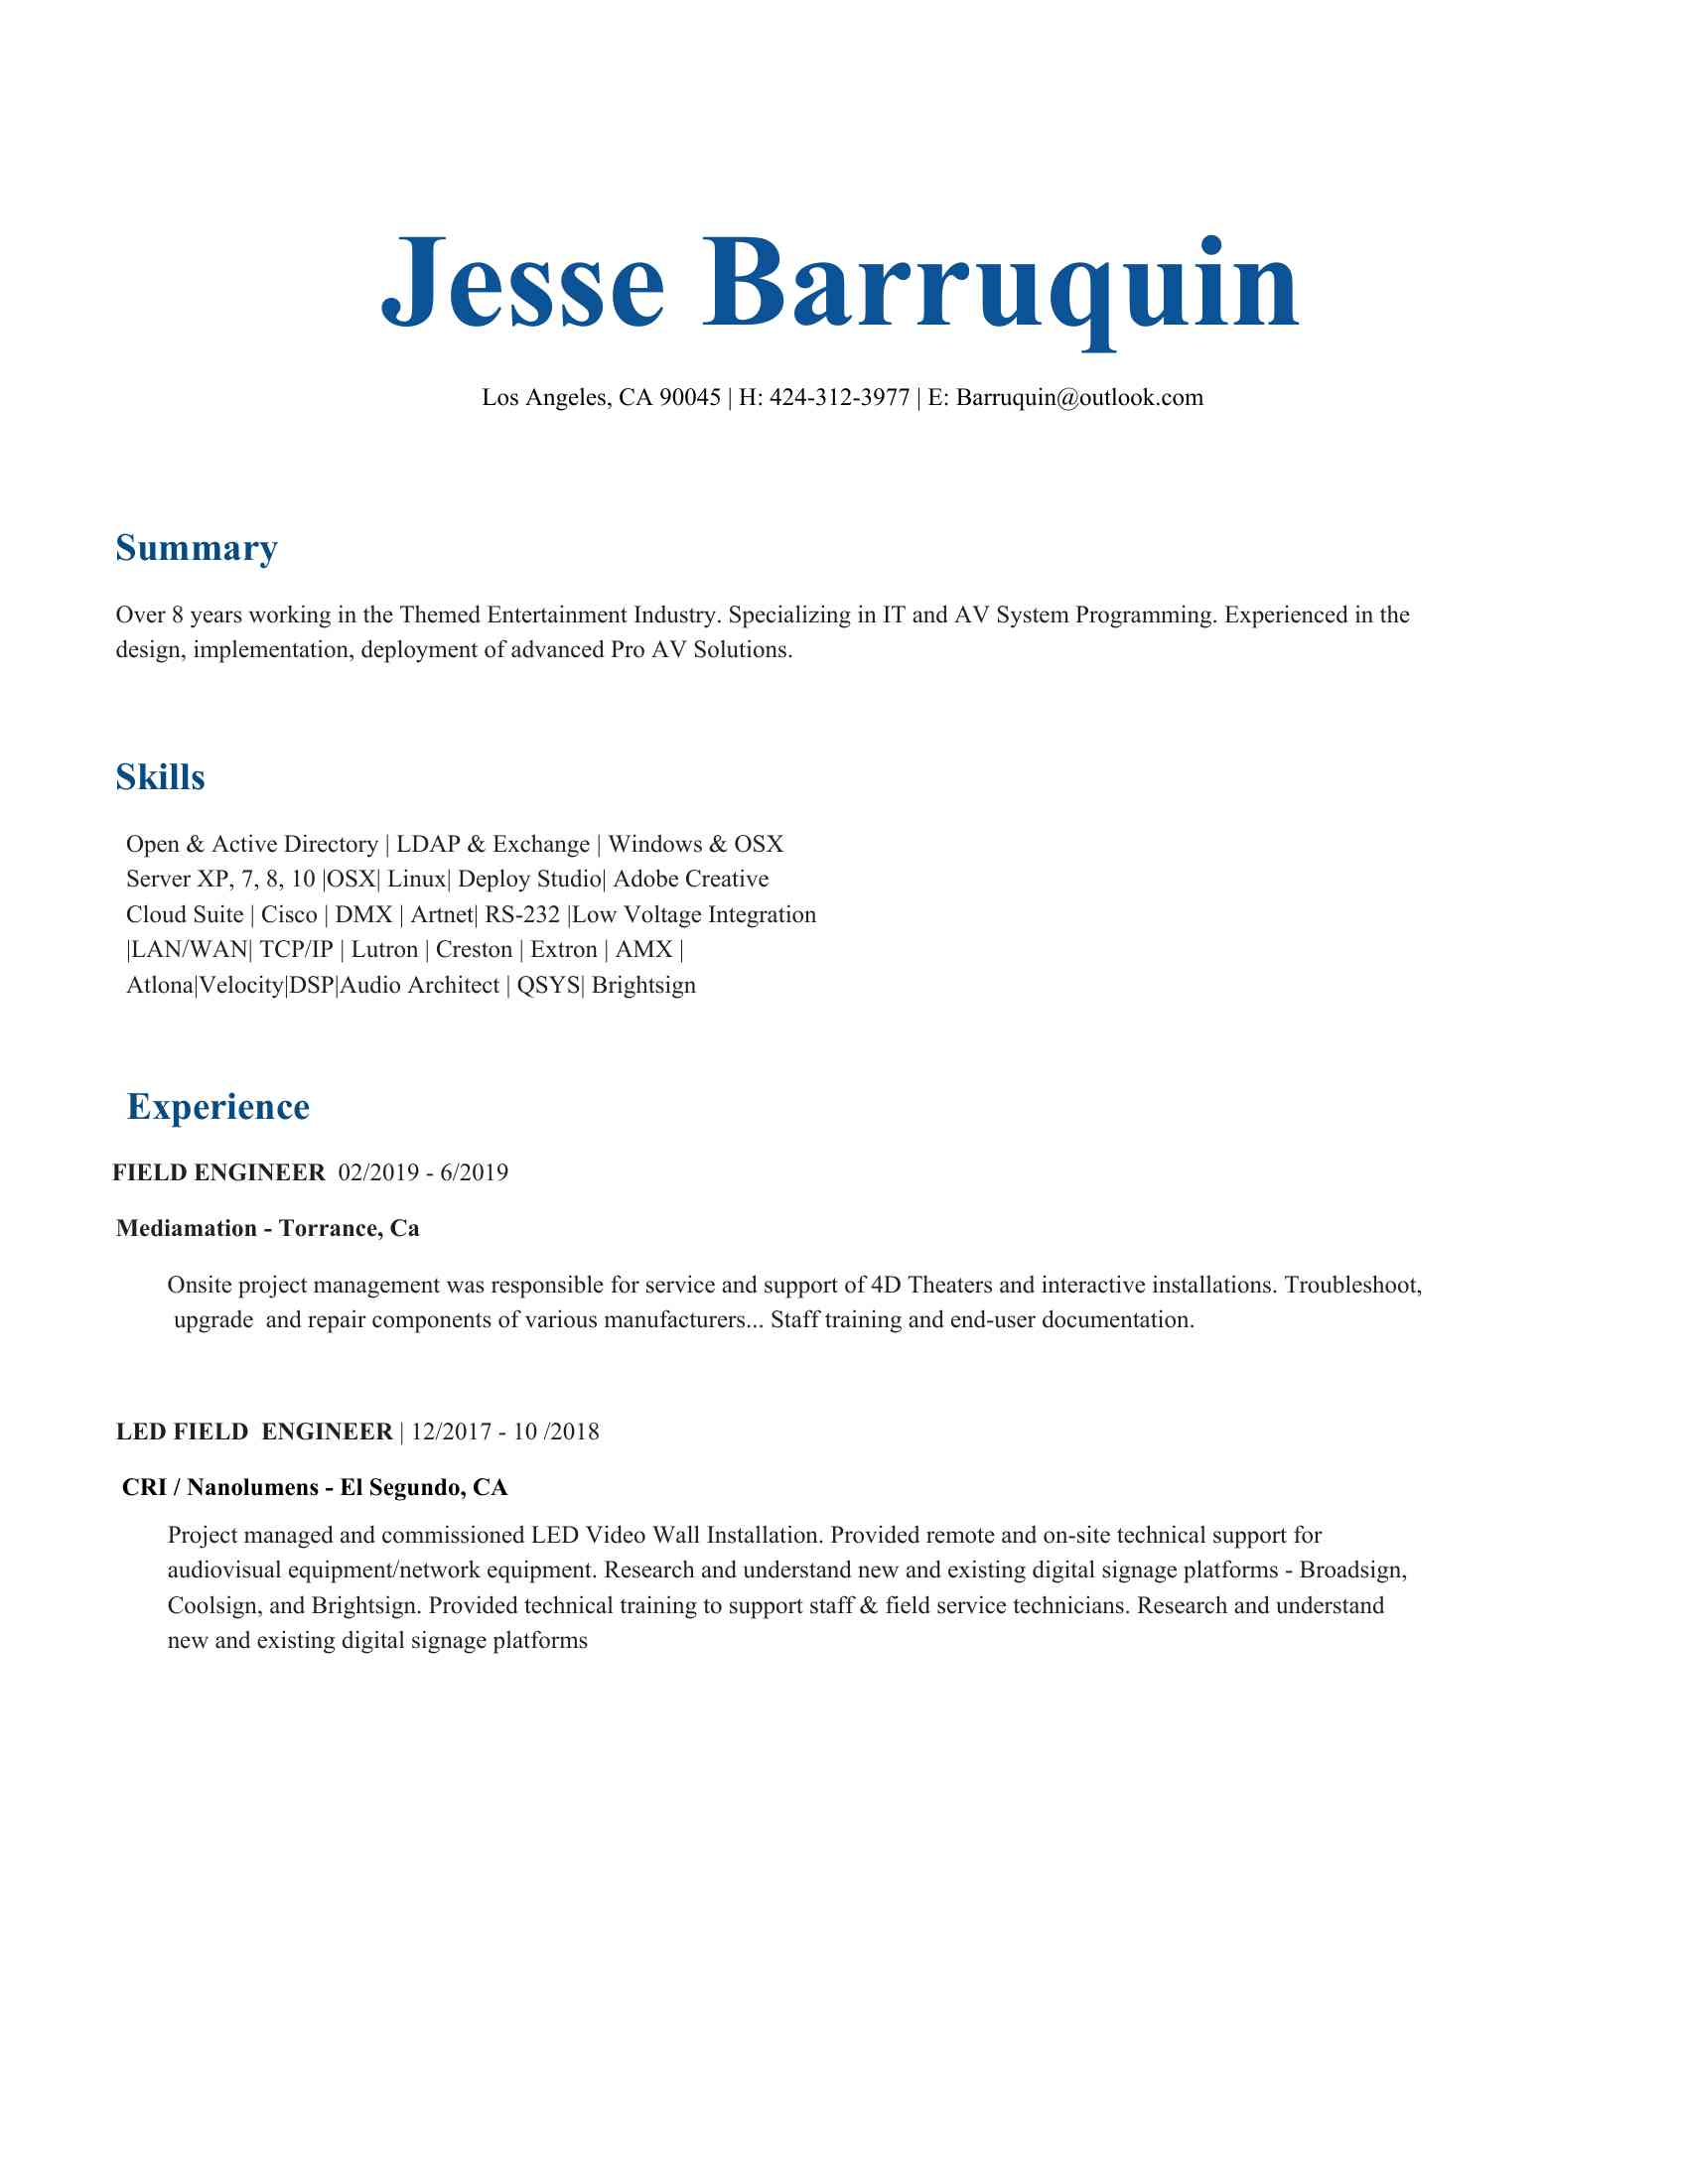 <BR>Jesse Barruquin <BR>Los Angeles, CA 90045 | H: (XXX) XXX-XXXX | E: XXXX@XXXX.XXX <BR>Summary <BR>Over 8 years working in the Themed Entertainment Industry. Specializing in IT and AV System Programming. Experienced in the <BR>design, implementation, deployment of advanced Pro AV Solutions. <BR>Skills <BR>Open & Active Directory | LDAP & Exchange | Windows & OSX <BR>Server XP, 7, 8, 10 |OSX| Linux| Deploy Studio| Adobe Creative <BR>Cloud Suite | Cisco | DMX | Artnet| RS-232 |Low Voltage Integration <BR>|LAN/WAN| TCP/IP | Lutron | Creston | Extron | AMX | <BR>Atlona|Velocity|DSP|Audio Architect | QSYS| Brightsign Experience <BR>FIELD ENGINEER ​ 02/2019 - 6/2019 <BR>Mediamation - Torrance, Ca  <BR>  Onsite project management was responsible for service and support of 4D Theaters and interactive installations. Troubleshoot, <BR>upgrade and repair components of various manufacturers... Staff training and end-user documentation.  LED FIELD ENGINEER ​| 12/2017 - 10 /2018 <BR> ​CRI / Nanolumens - El Segundo, CA <BR>Project managed and commissioned LED Video Wall Installation. Provided remote and on-site technical support for <BR>audiovisual equipment/network equipment. Research and understand new and existing digital signage platforms - Broadsign, <BR>Coolsign, and Brightsign. Provided technical training to support staff & field service technicians. Research and understand <BR>new and existing digital signage platforms DIGITAL SIGNAGE ENGINEER/IT ADMIN ​| 08/2010 to 10/2017 <BR>ETI Inc - El Segundo, CA <BR>Programmed and managed installation of video walls and system controls. Configured and administered imaging and deployment rollout <BR>of over 3000 digital signage players using Apple and Microsoft systems. Analyzed and resolved issues associated with AV controls, <BR>audio systems, and computer systems. Programmed and tested digital signage implementations and version releases. <BR>Participated in the integration of computing systems with database applications. Documented software builds and deployment processes <BR>including detailed step-by-step instructions. Performed technical demonstrations for clients and provided product support for sales teams <BR>and professional services. Interfaced with development and project teams to create installation test plans for lab and field testing and <BR>implementation. Assisted with project teams to develop resource and project plans regarding computer system and network integrations. <BR>Provided 3rd Tier support troubleshooting A/V systems, computer systems, networks, hardware and software issues. Travel onsite tech <BR>for project installations, service, and client support QUALITY ASSURANCE ANALYST ​| 06/2006 to 06/2009 <BR>Interneer Inc - Culver City, CA <BR>duties included creation and execution of testing processes and strategies. Testing for regression, performance stress, /load, functionality, <BR>and system integration. Leveraged in technical troubleshooting within an enterprise environment, including system crashes, data <BR>recoveries. Engaged and tracked Priority 1 issues, with responsibility for the timely documentation, escalation (if appropriate), resolution <BR>and closure of trouble tickets. Handled 10 +technical/mission-critical tickets daily and consistently met high service standards. <BR>Education and Training <BR>ITT Technical Institute - Torrance, CA | Bachelor of Science <BR>Information Technology, 2010 <BR>